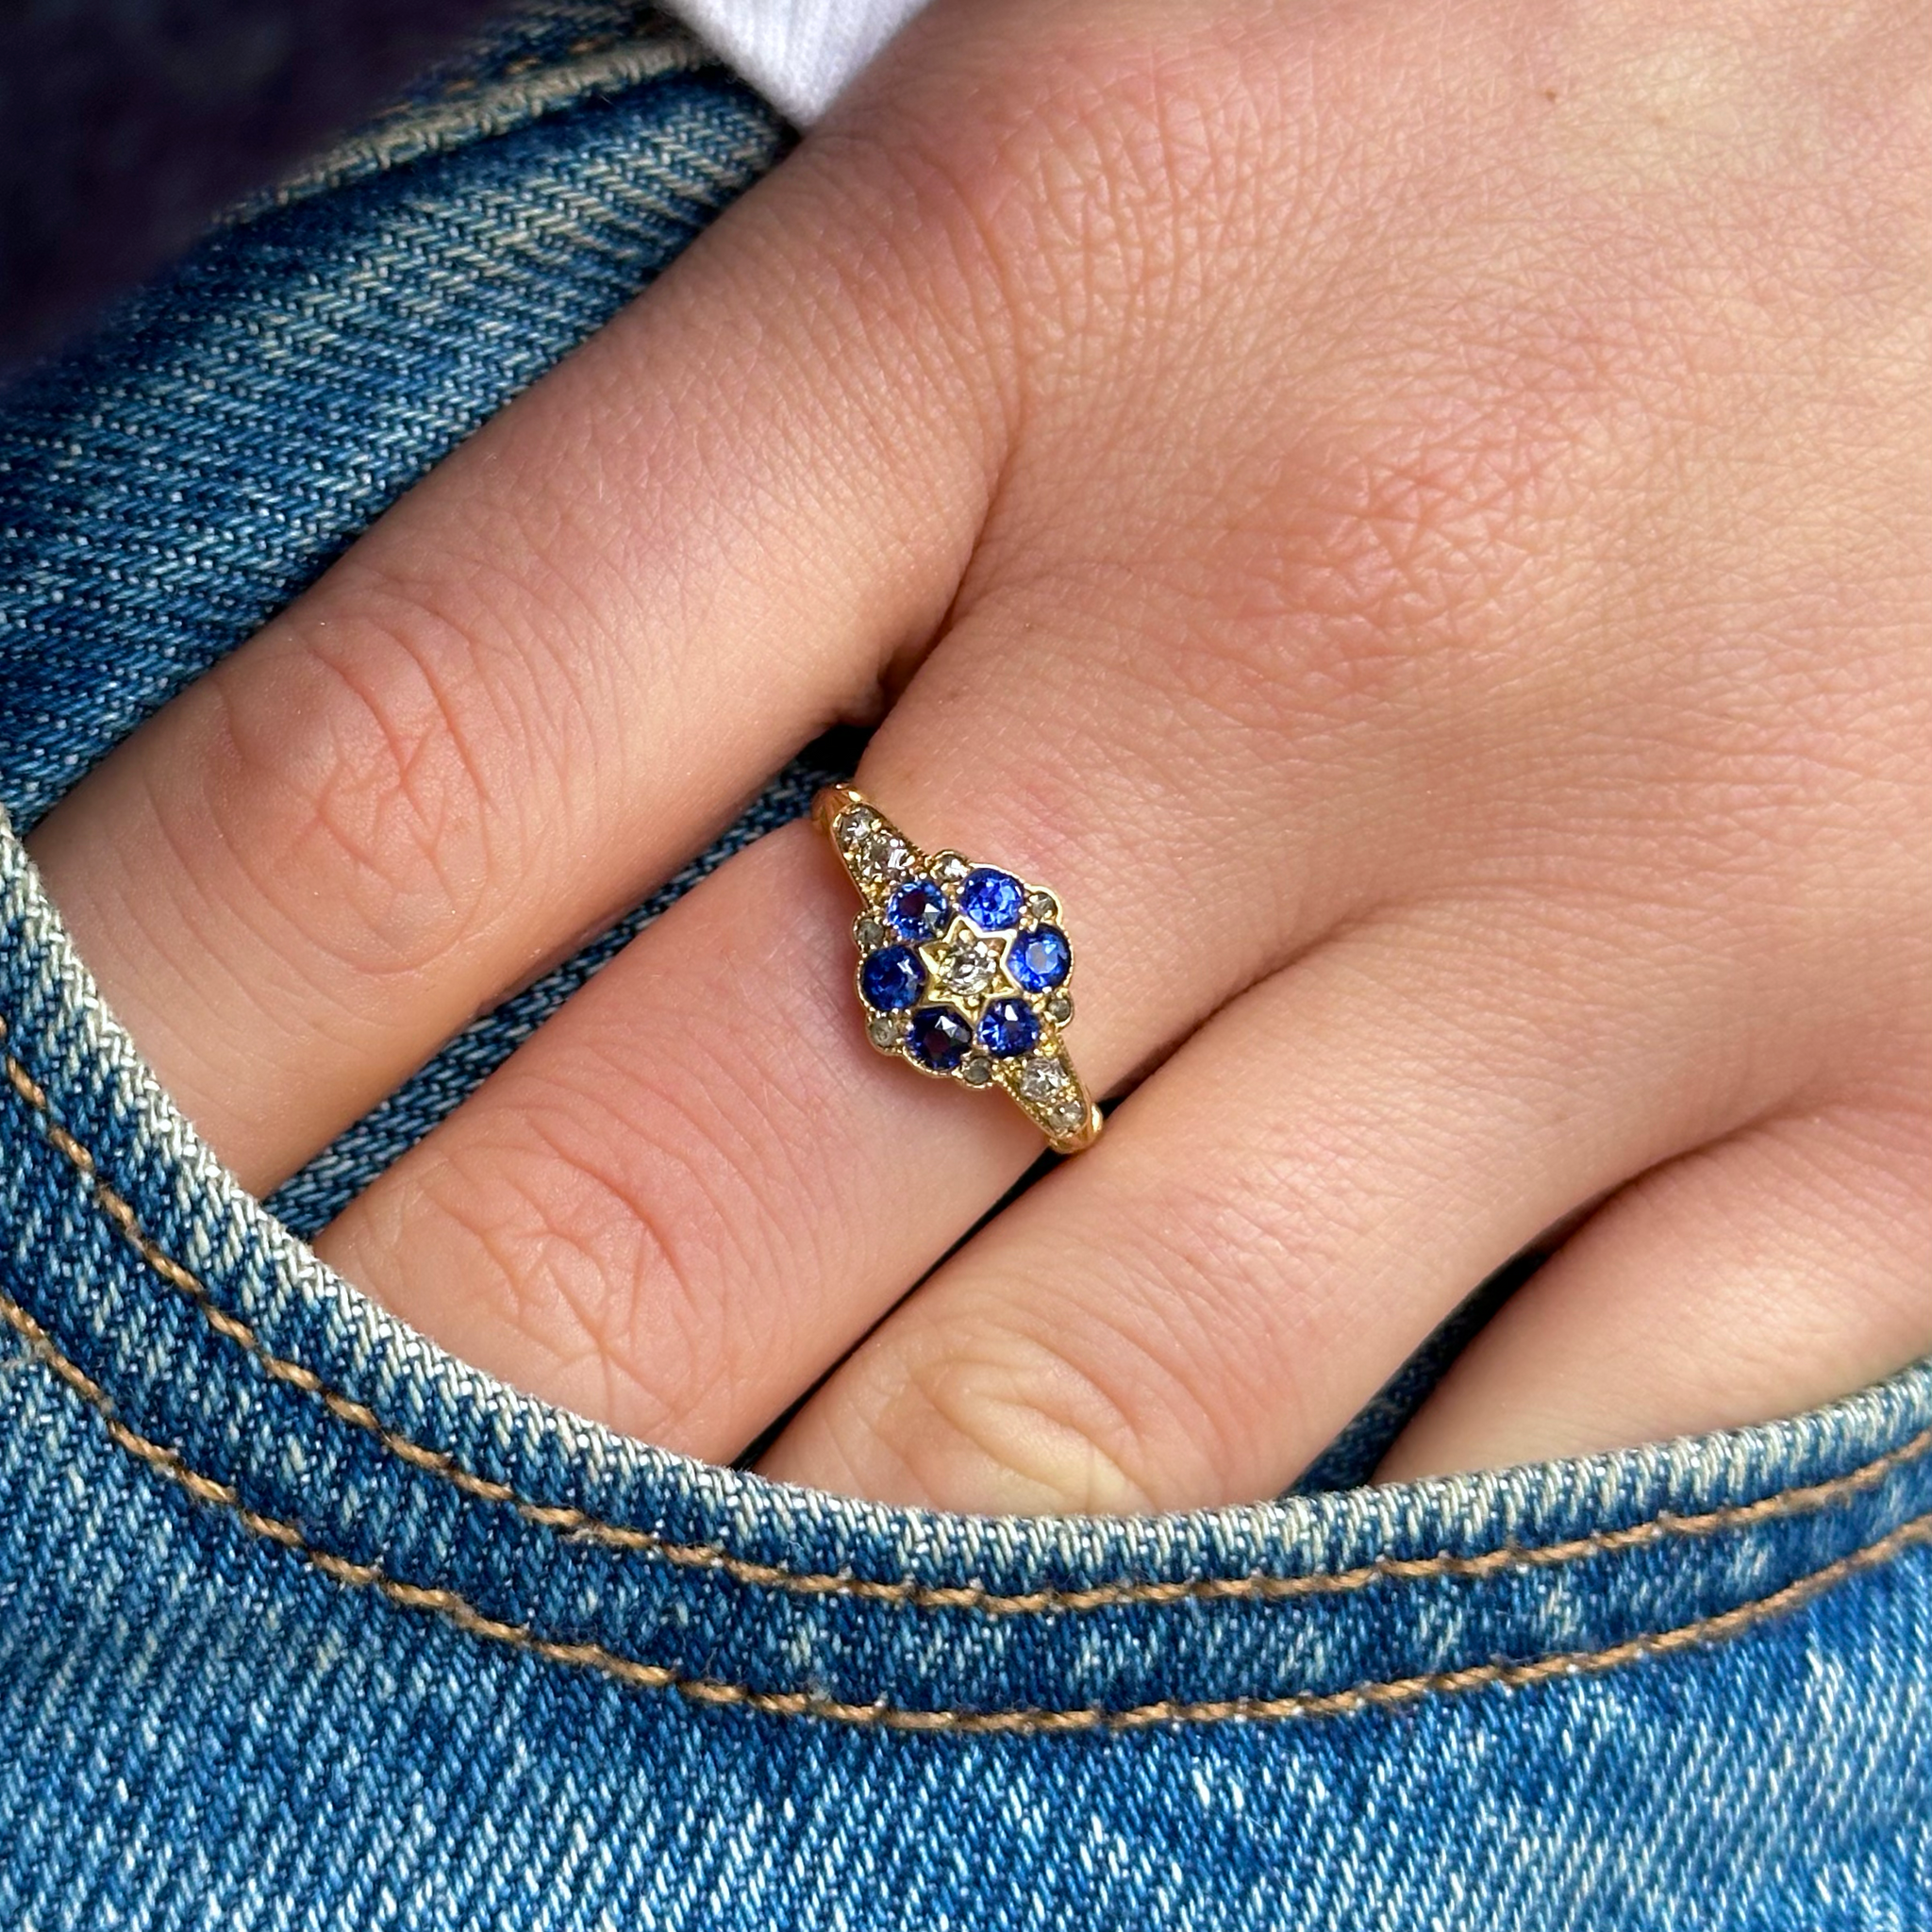 Antique Edwardian sapphire and diamond cluster ring, worn on hand in pocket of jeans